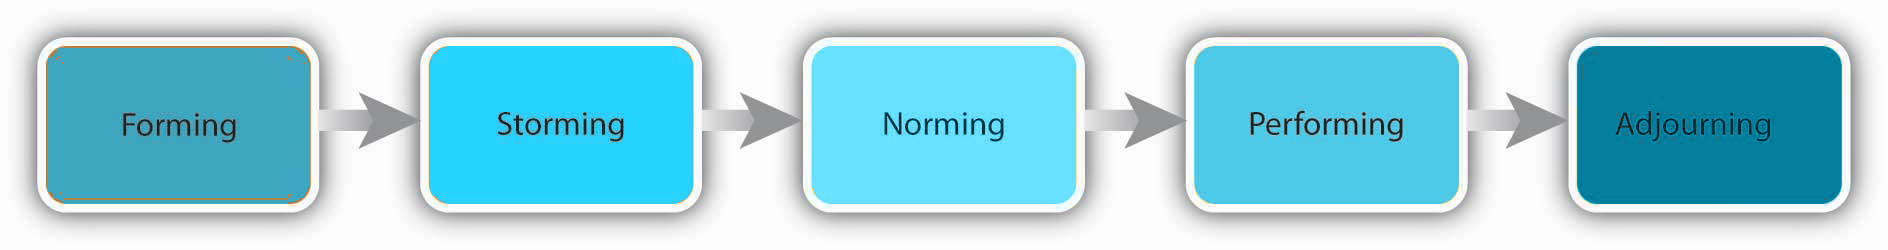 Forming, Storming, Norming, Preforming, and Adjourning